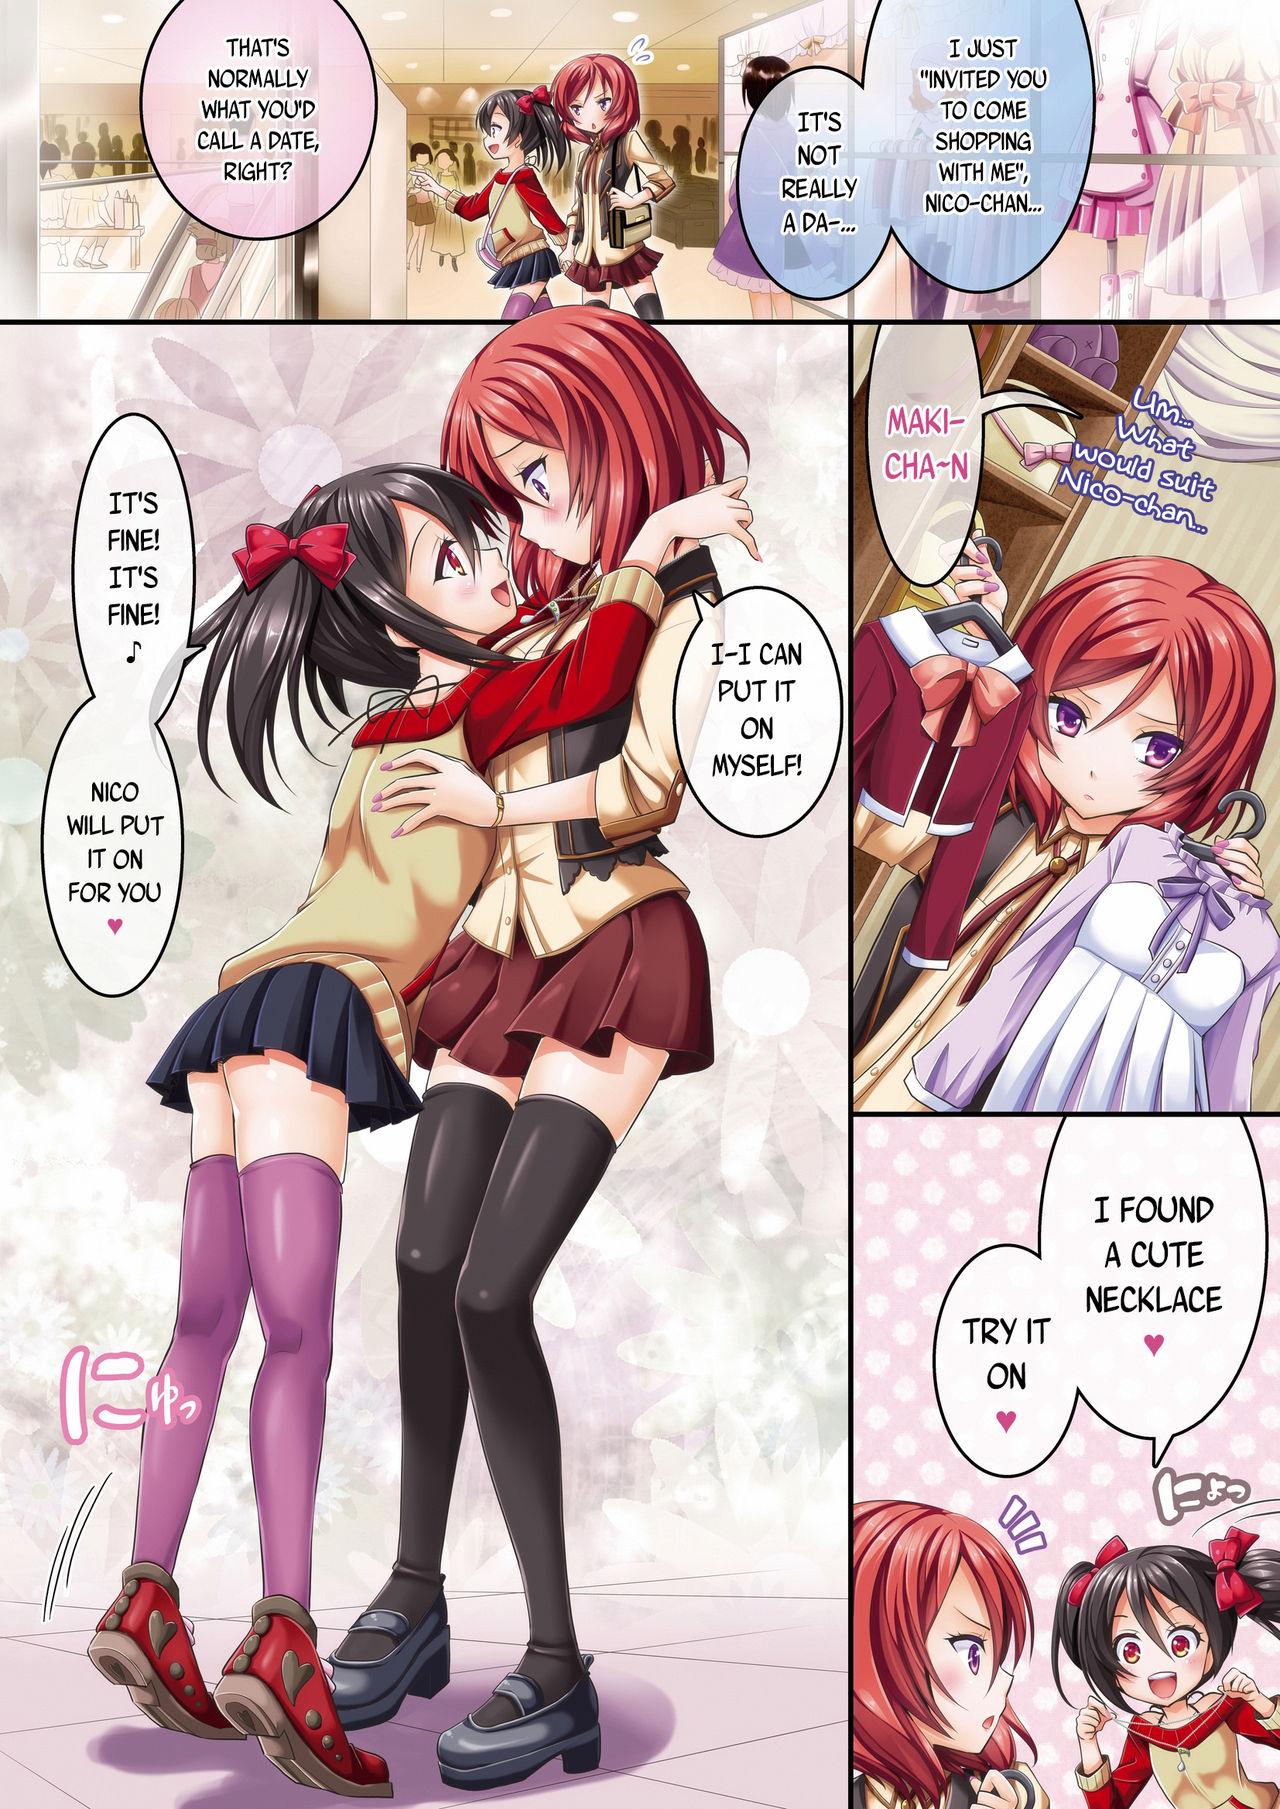 Tattoos NorE - Love live Blowjobs - Page 4